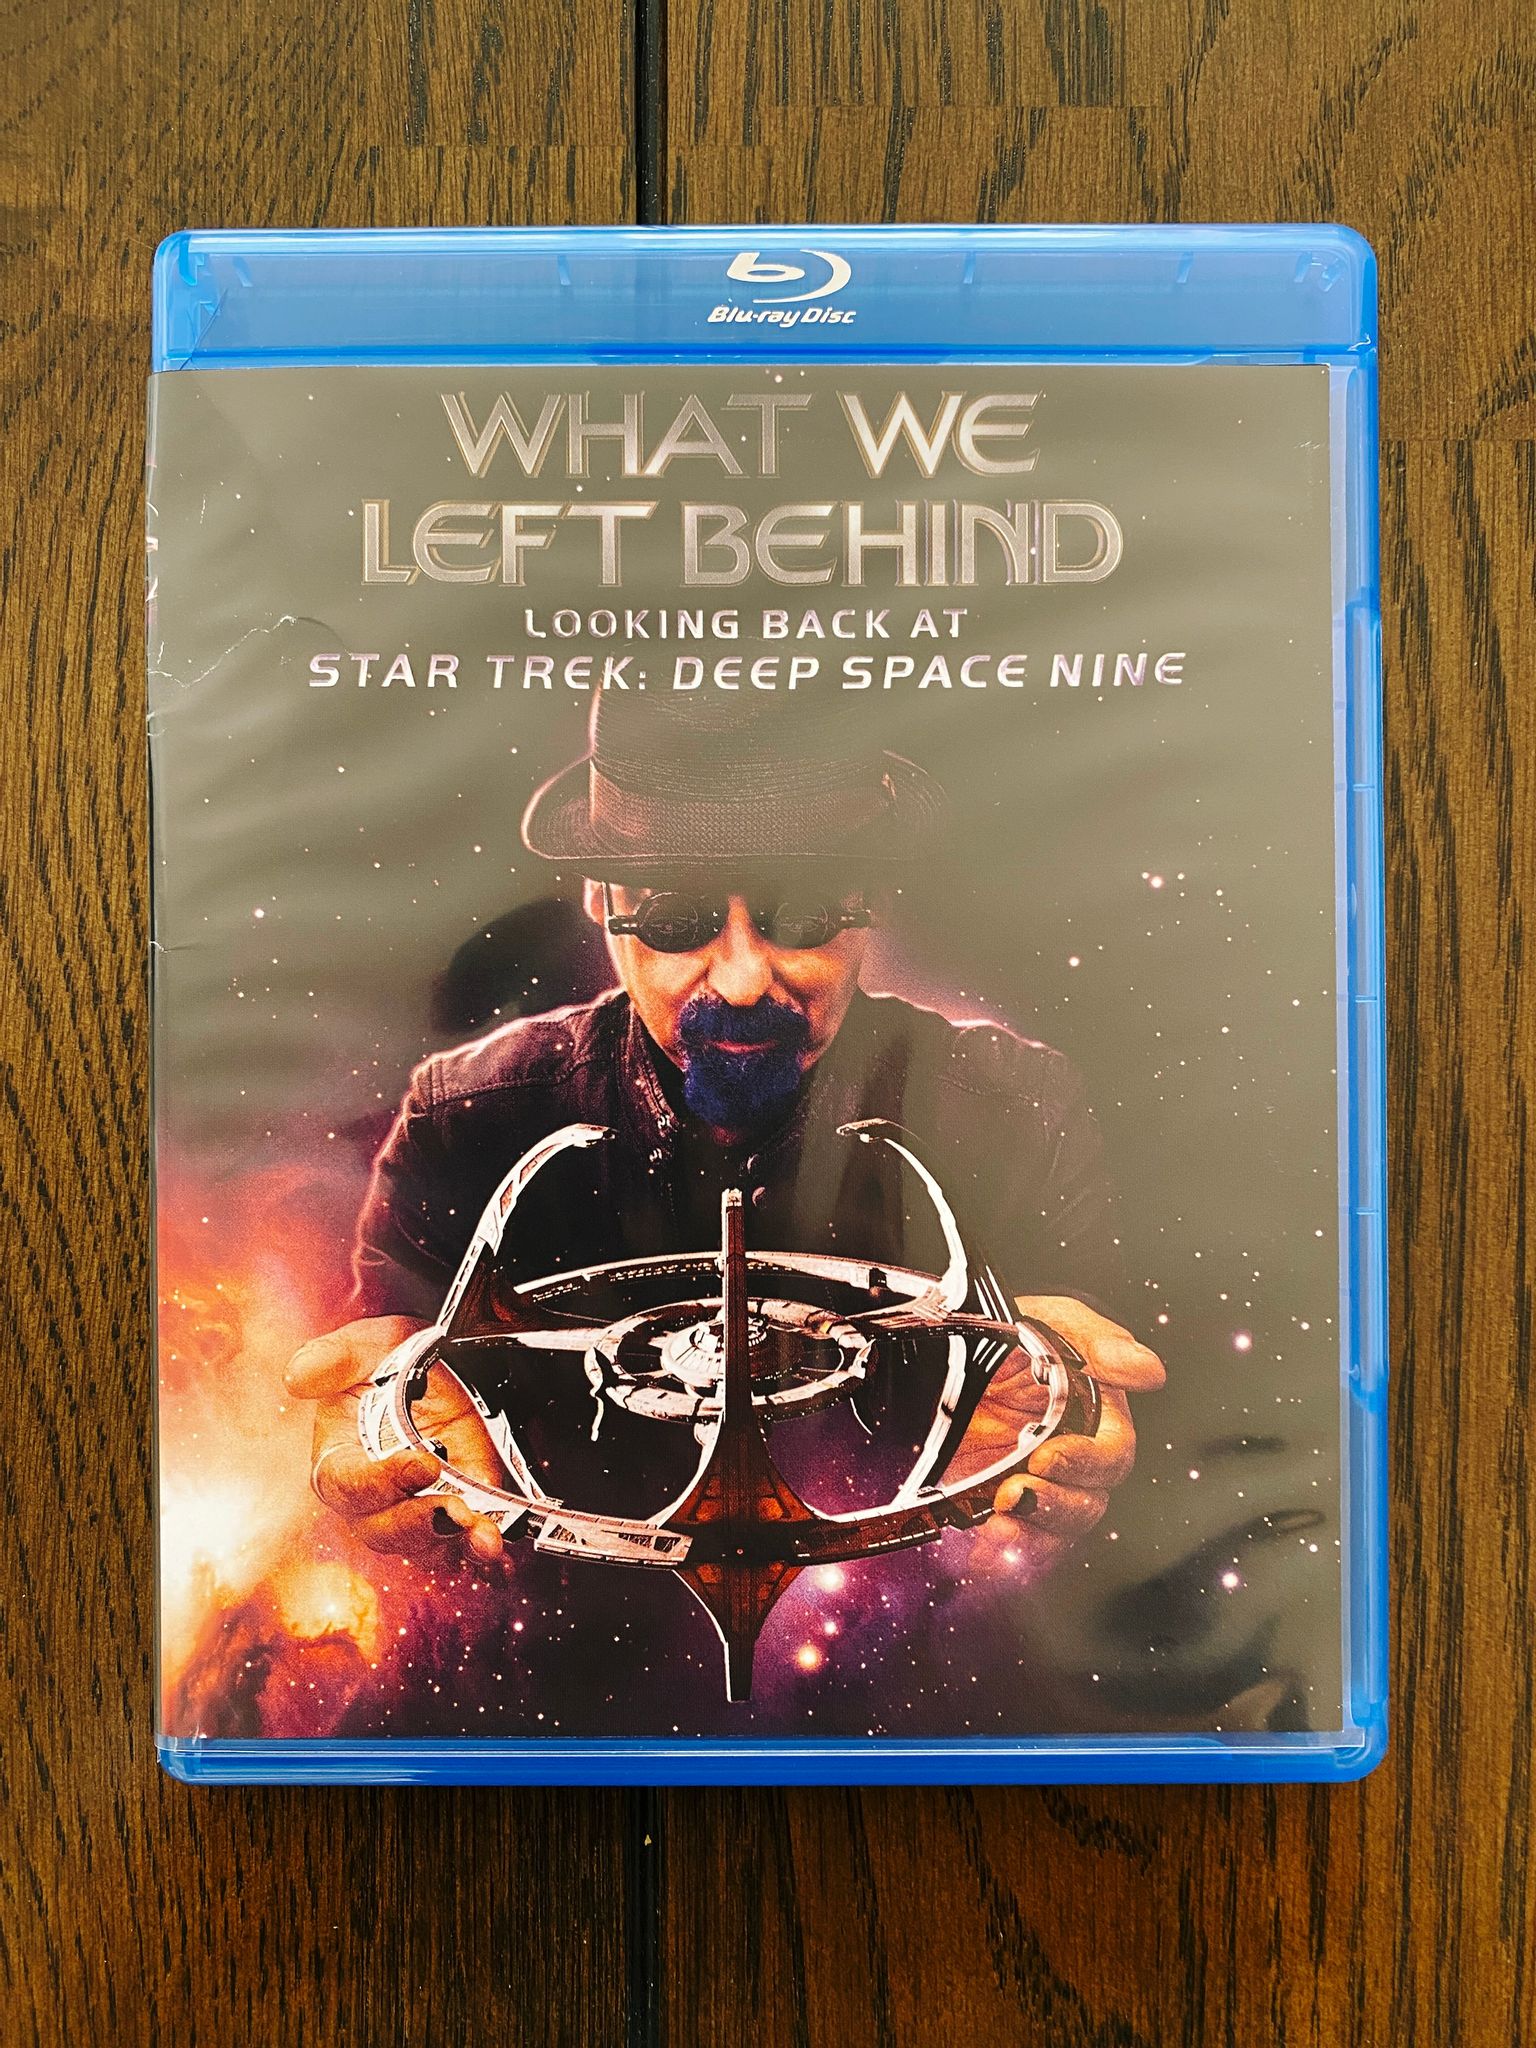 A photo of the Blu-ray "What We Left Behind", a documentary about Star Trek: Deep Space Nine.